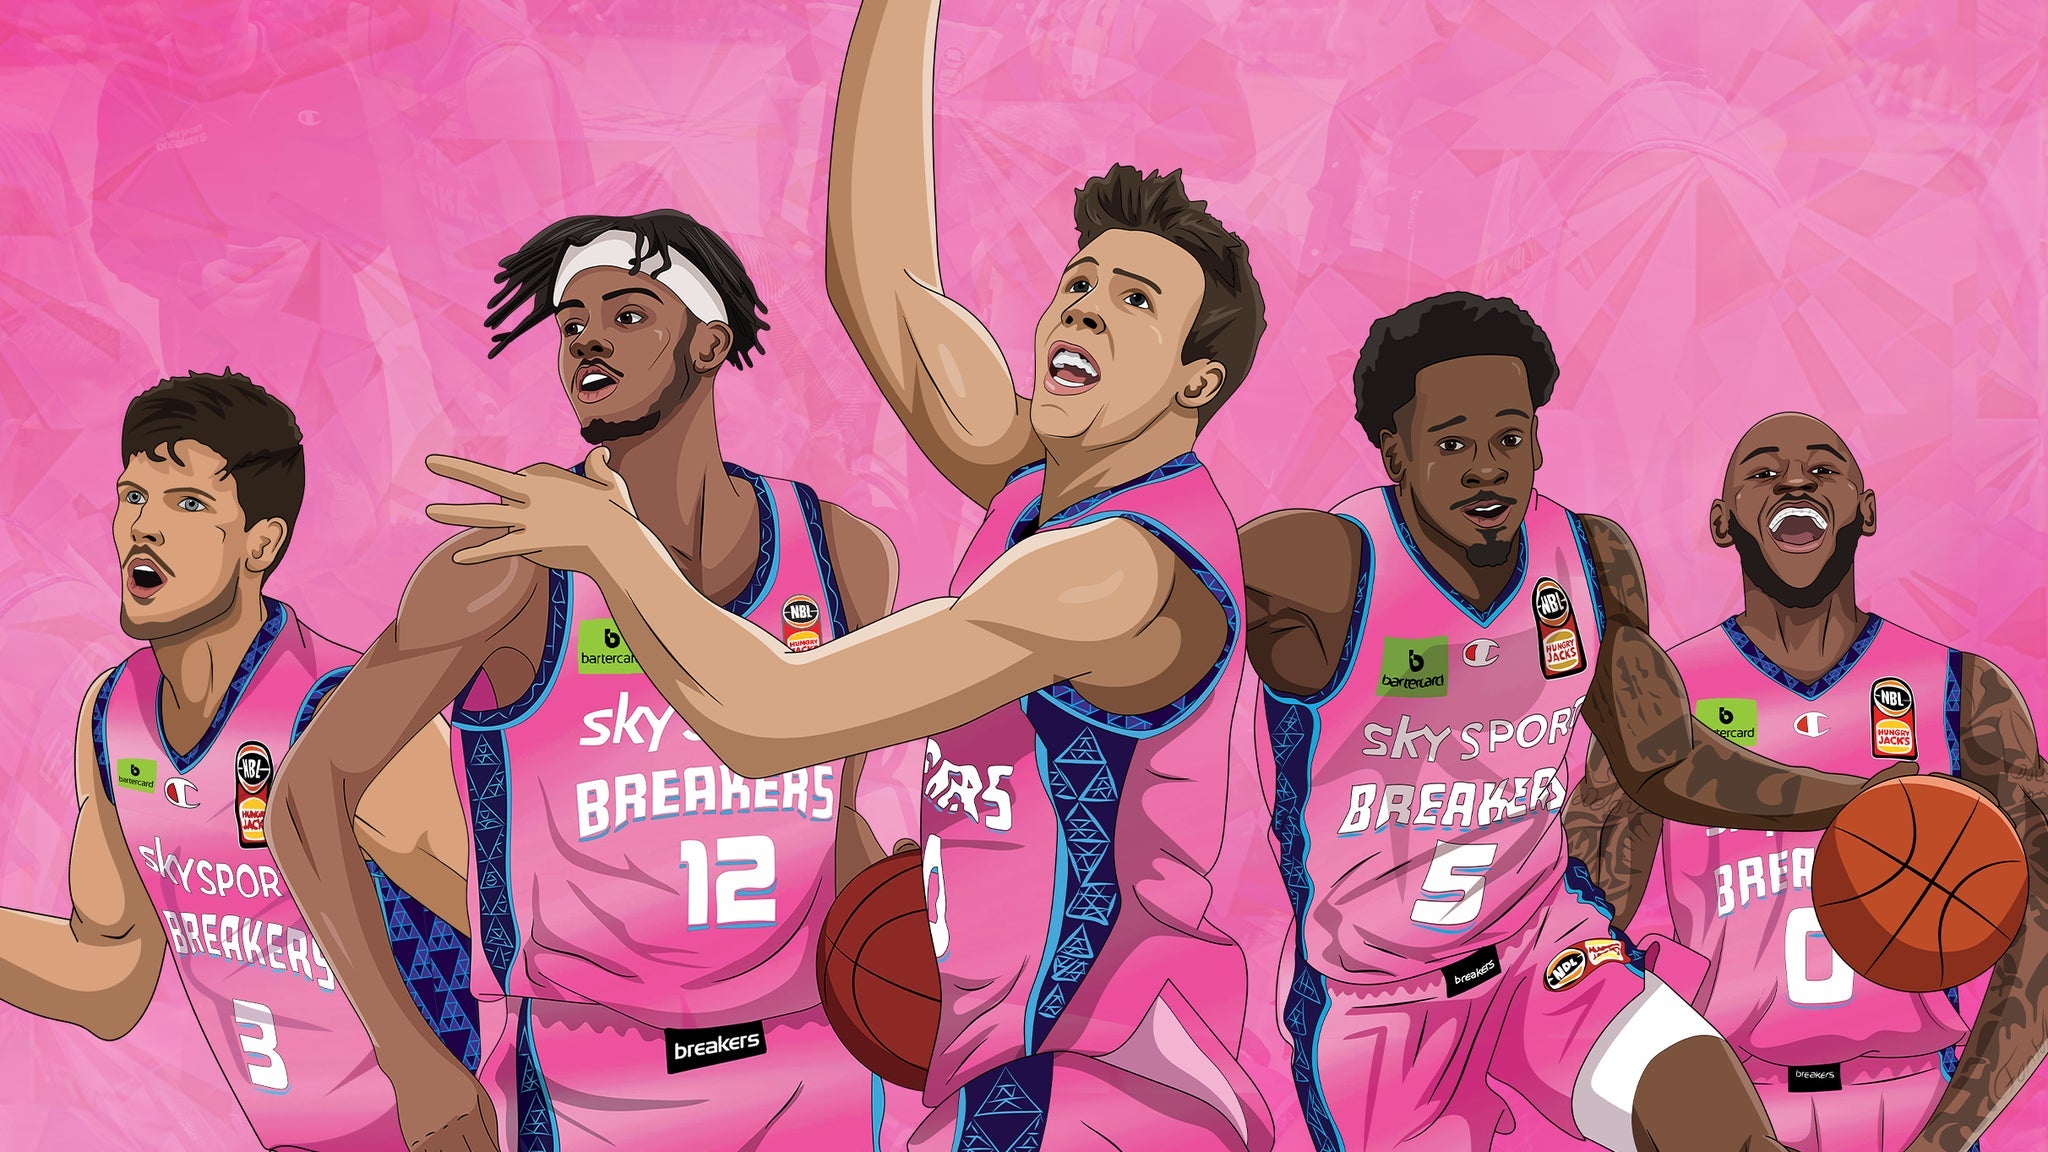 Sky Sport Breakers vs Sydney Kings - Championship Series in Auckland promo photo for Sydney Kings Supporters presale offer code